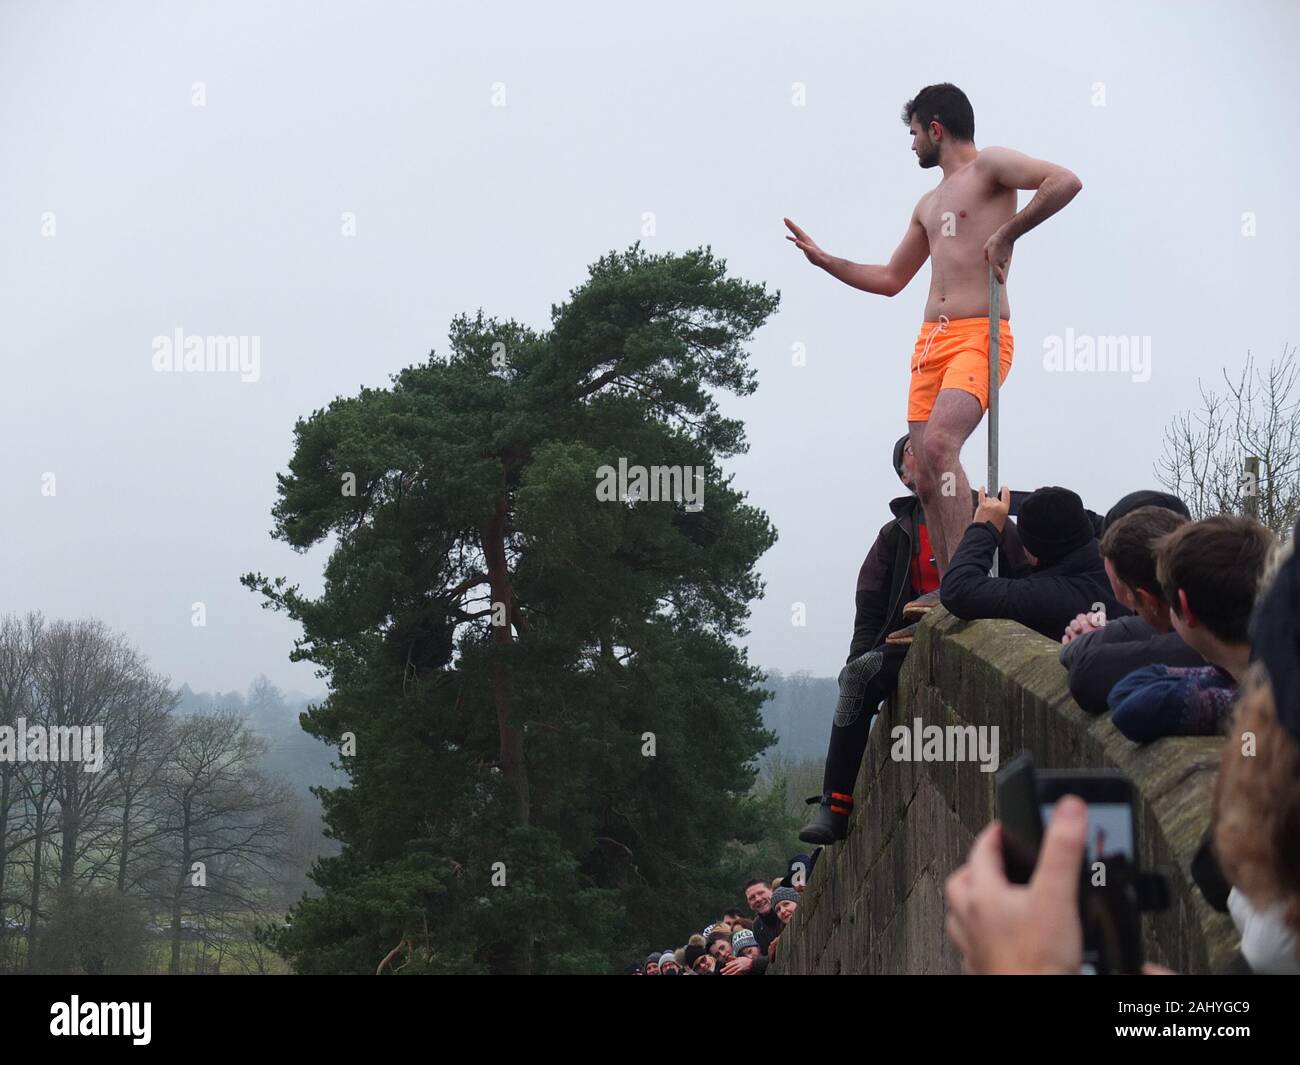 Mappleton (Mapleton) Bridge Jump, annual New Years Day custom. Participant in swimming trunks prepares to jump off Okeover Bridge and into River Dove. Stock Photo